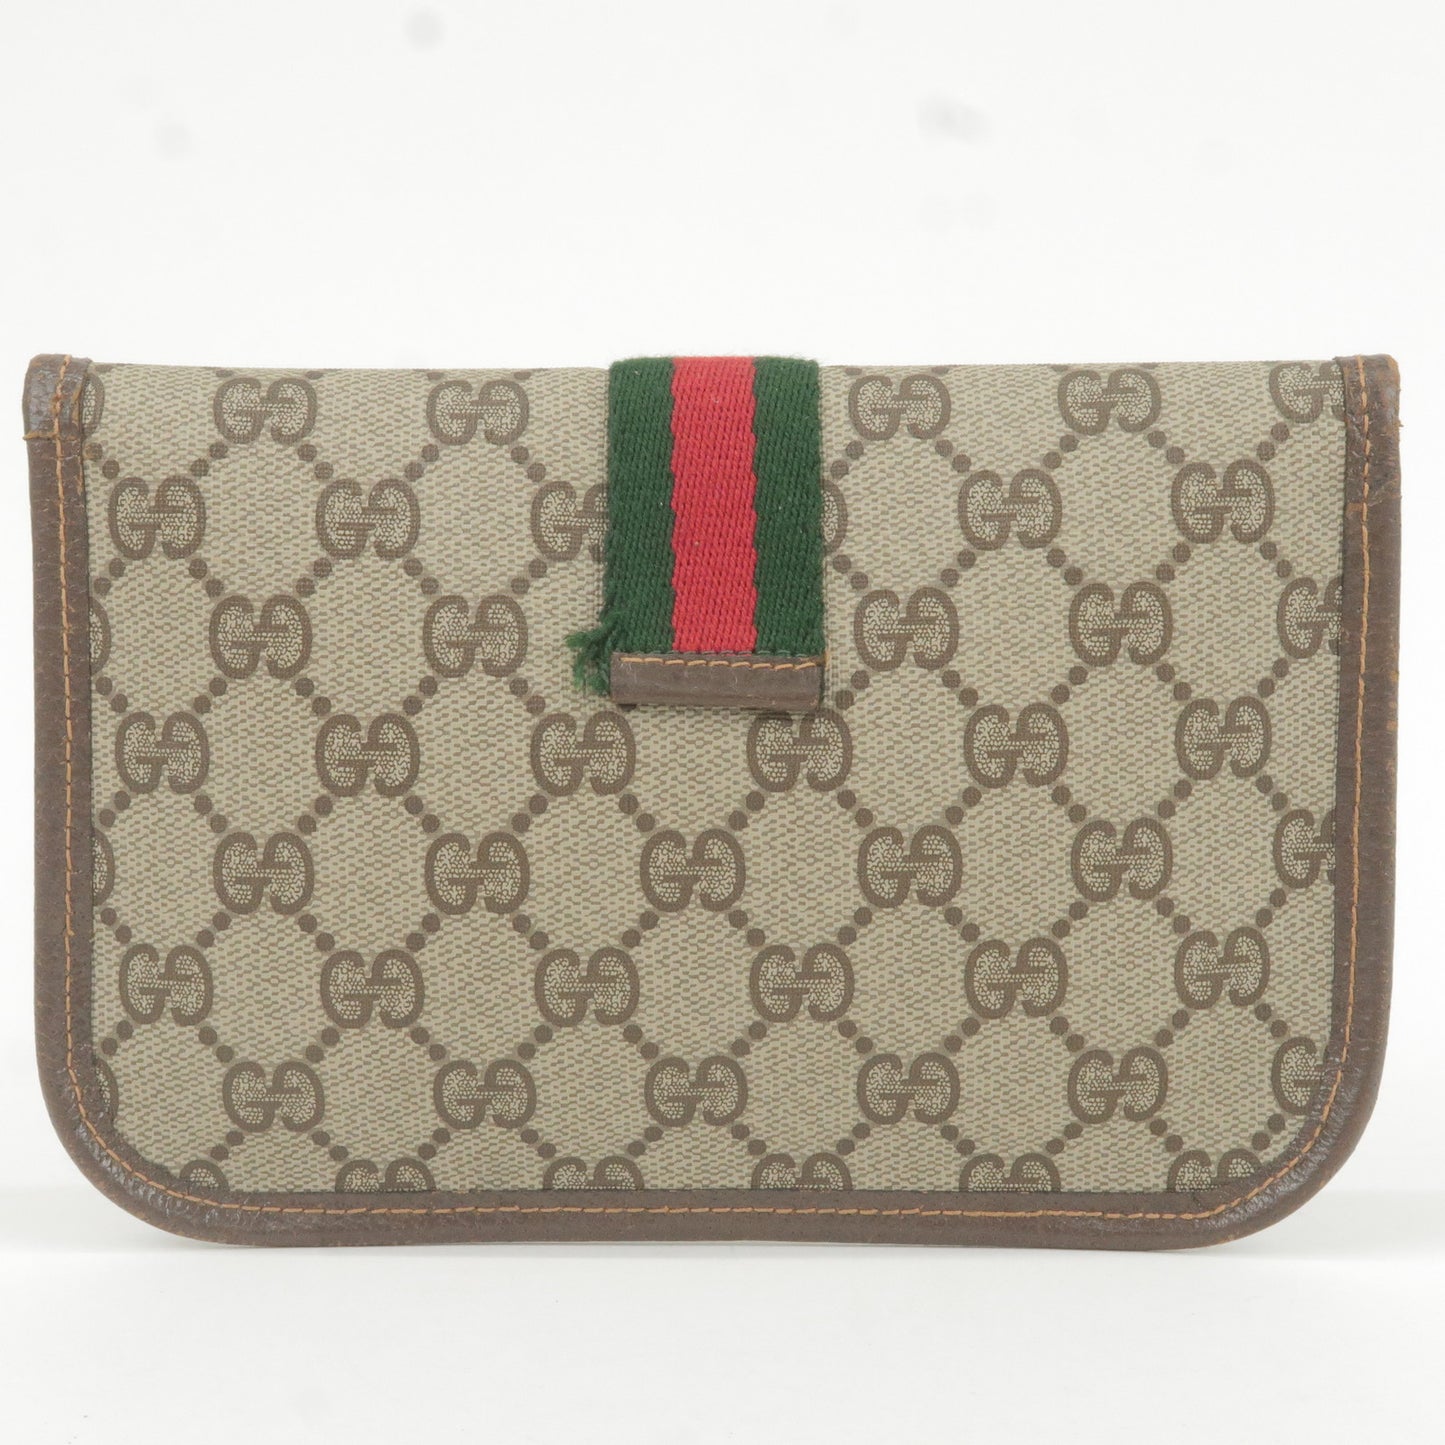 GUCCI Sherry GG Plus Leather Clutch Bag Pouch Beige 89.01.021